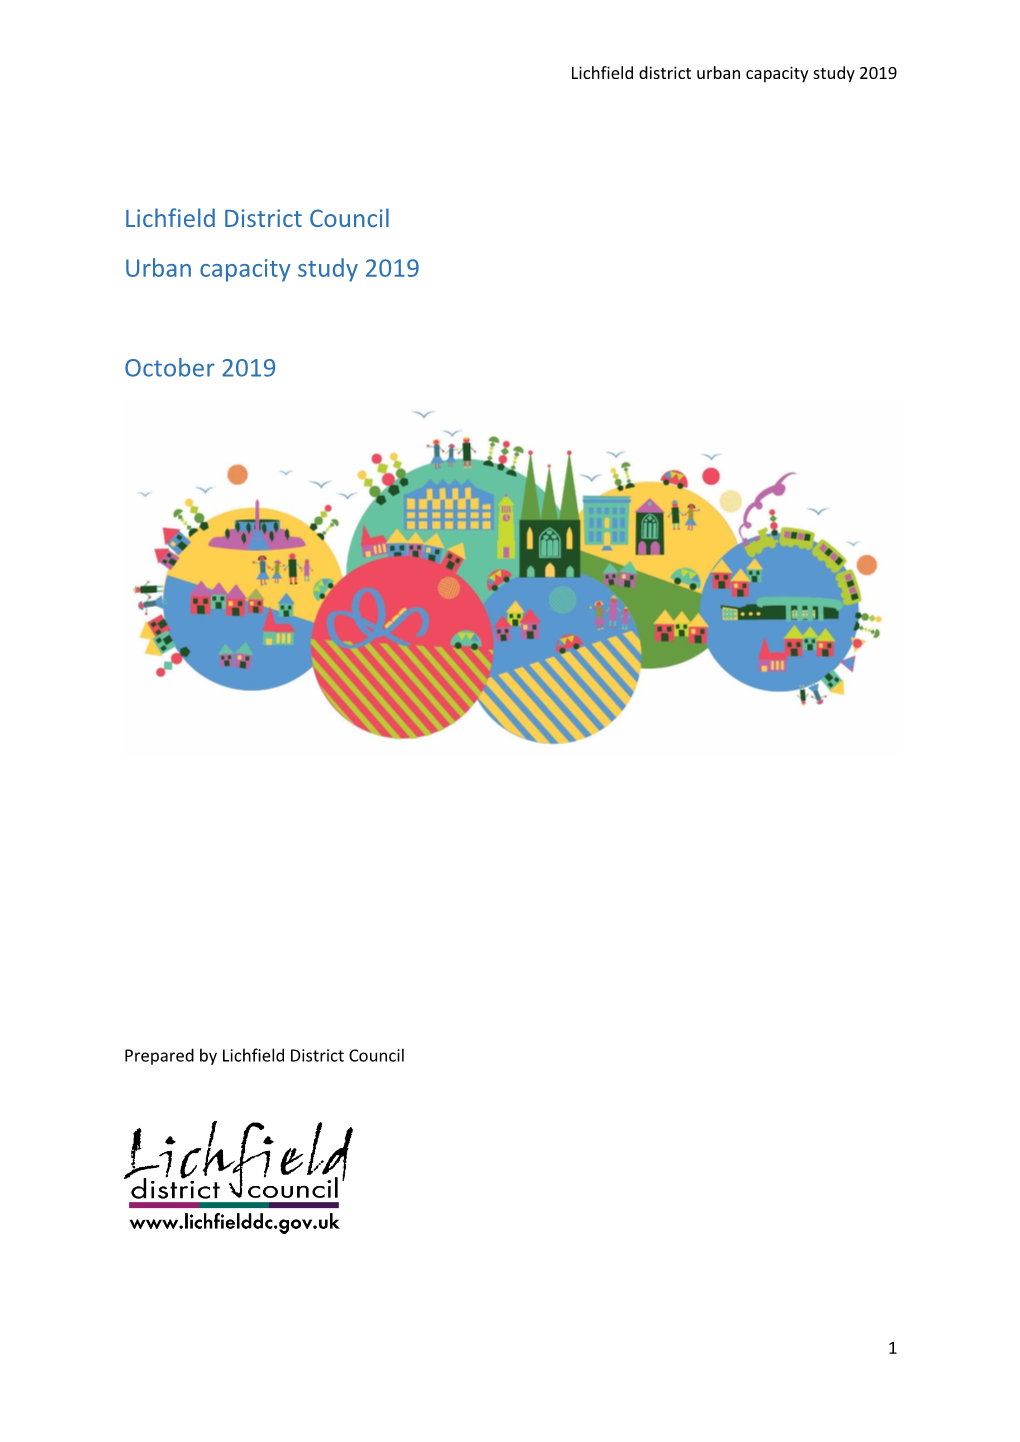 Lichfield District Council Urban Capacity Study 2019 October 2019